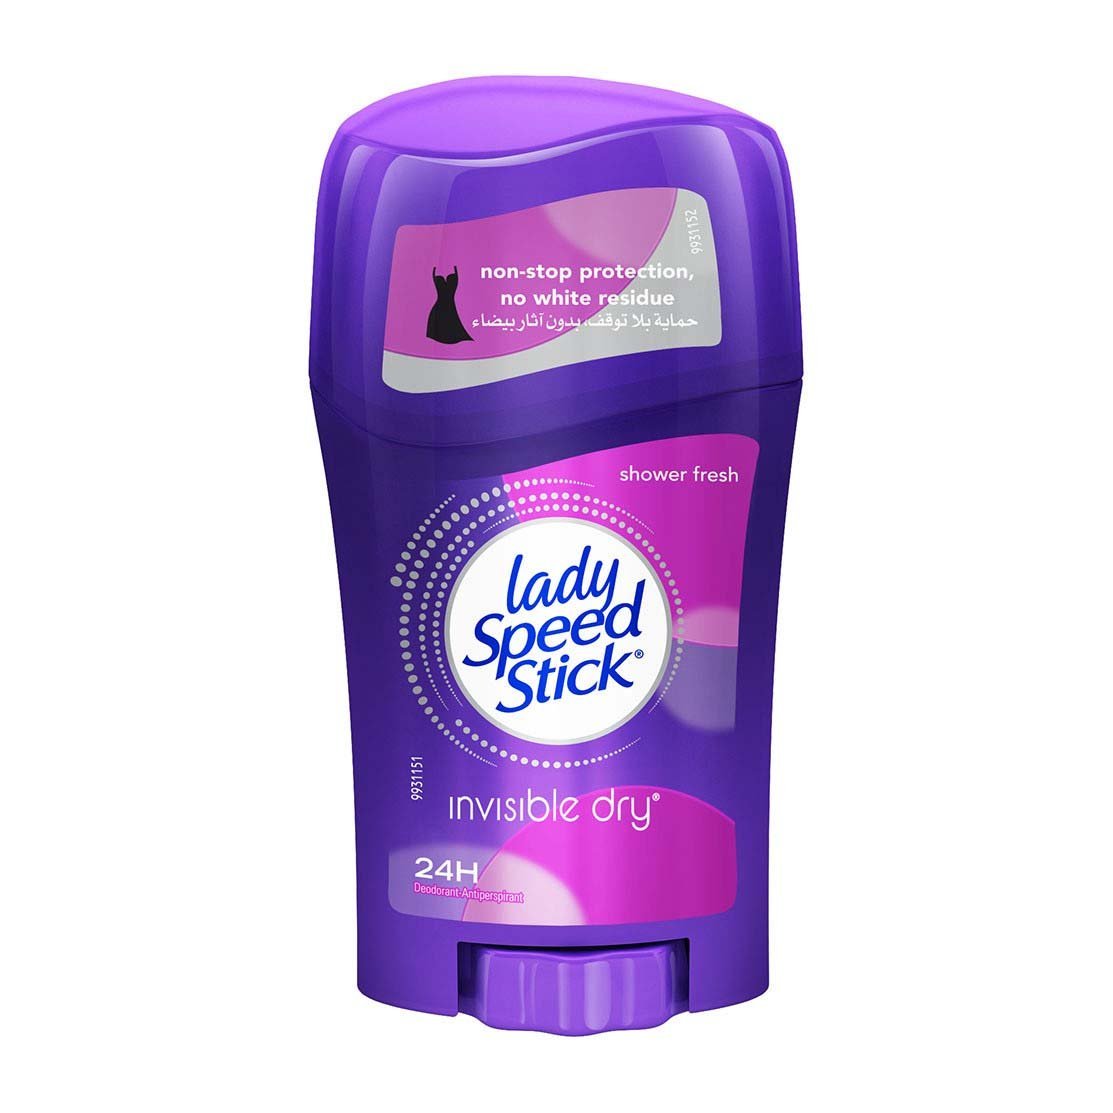 Lady Speed Stick Shower Fresh Invisible Dry Deodorant Stick - 40gm - Bloom Pharmacy